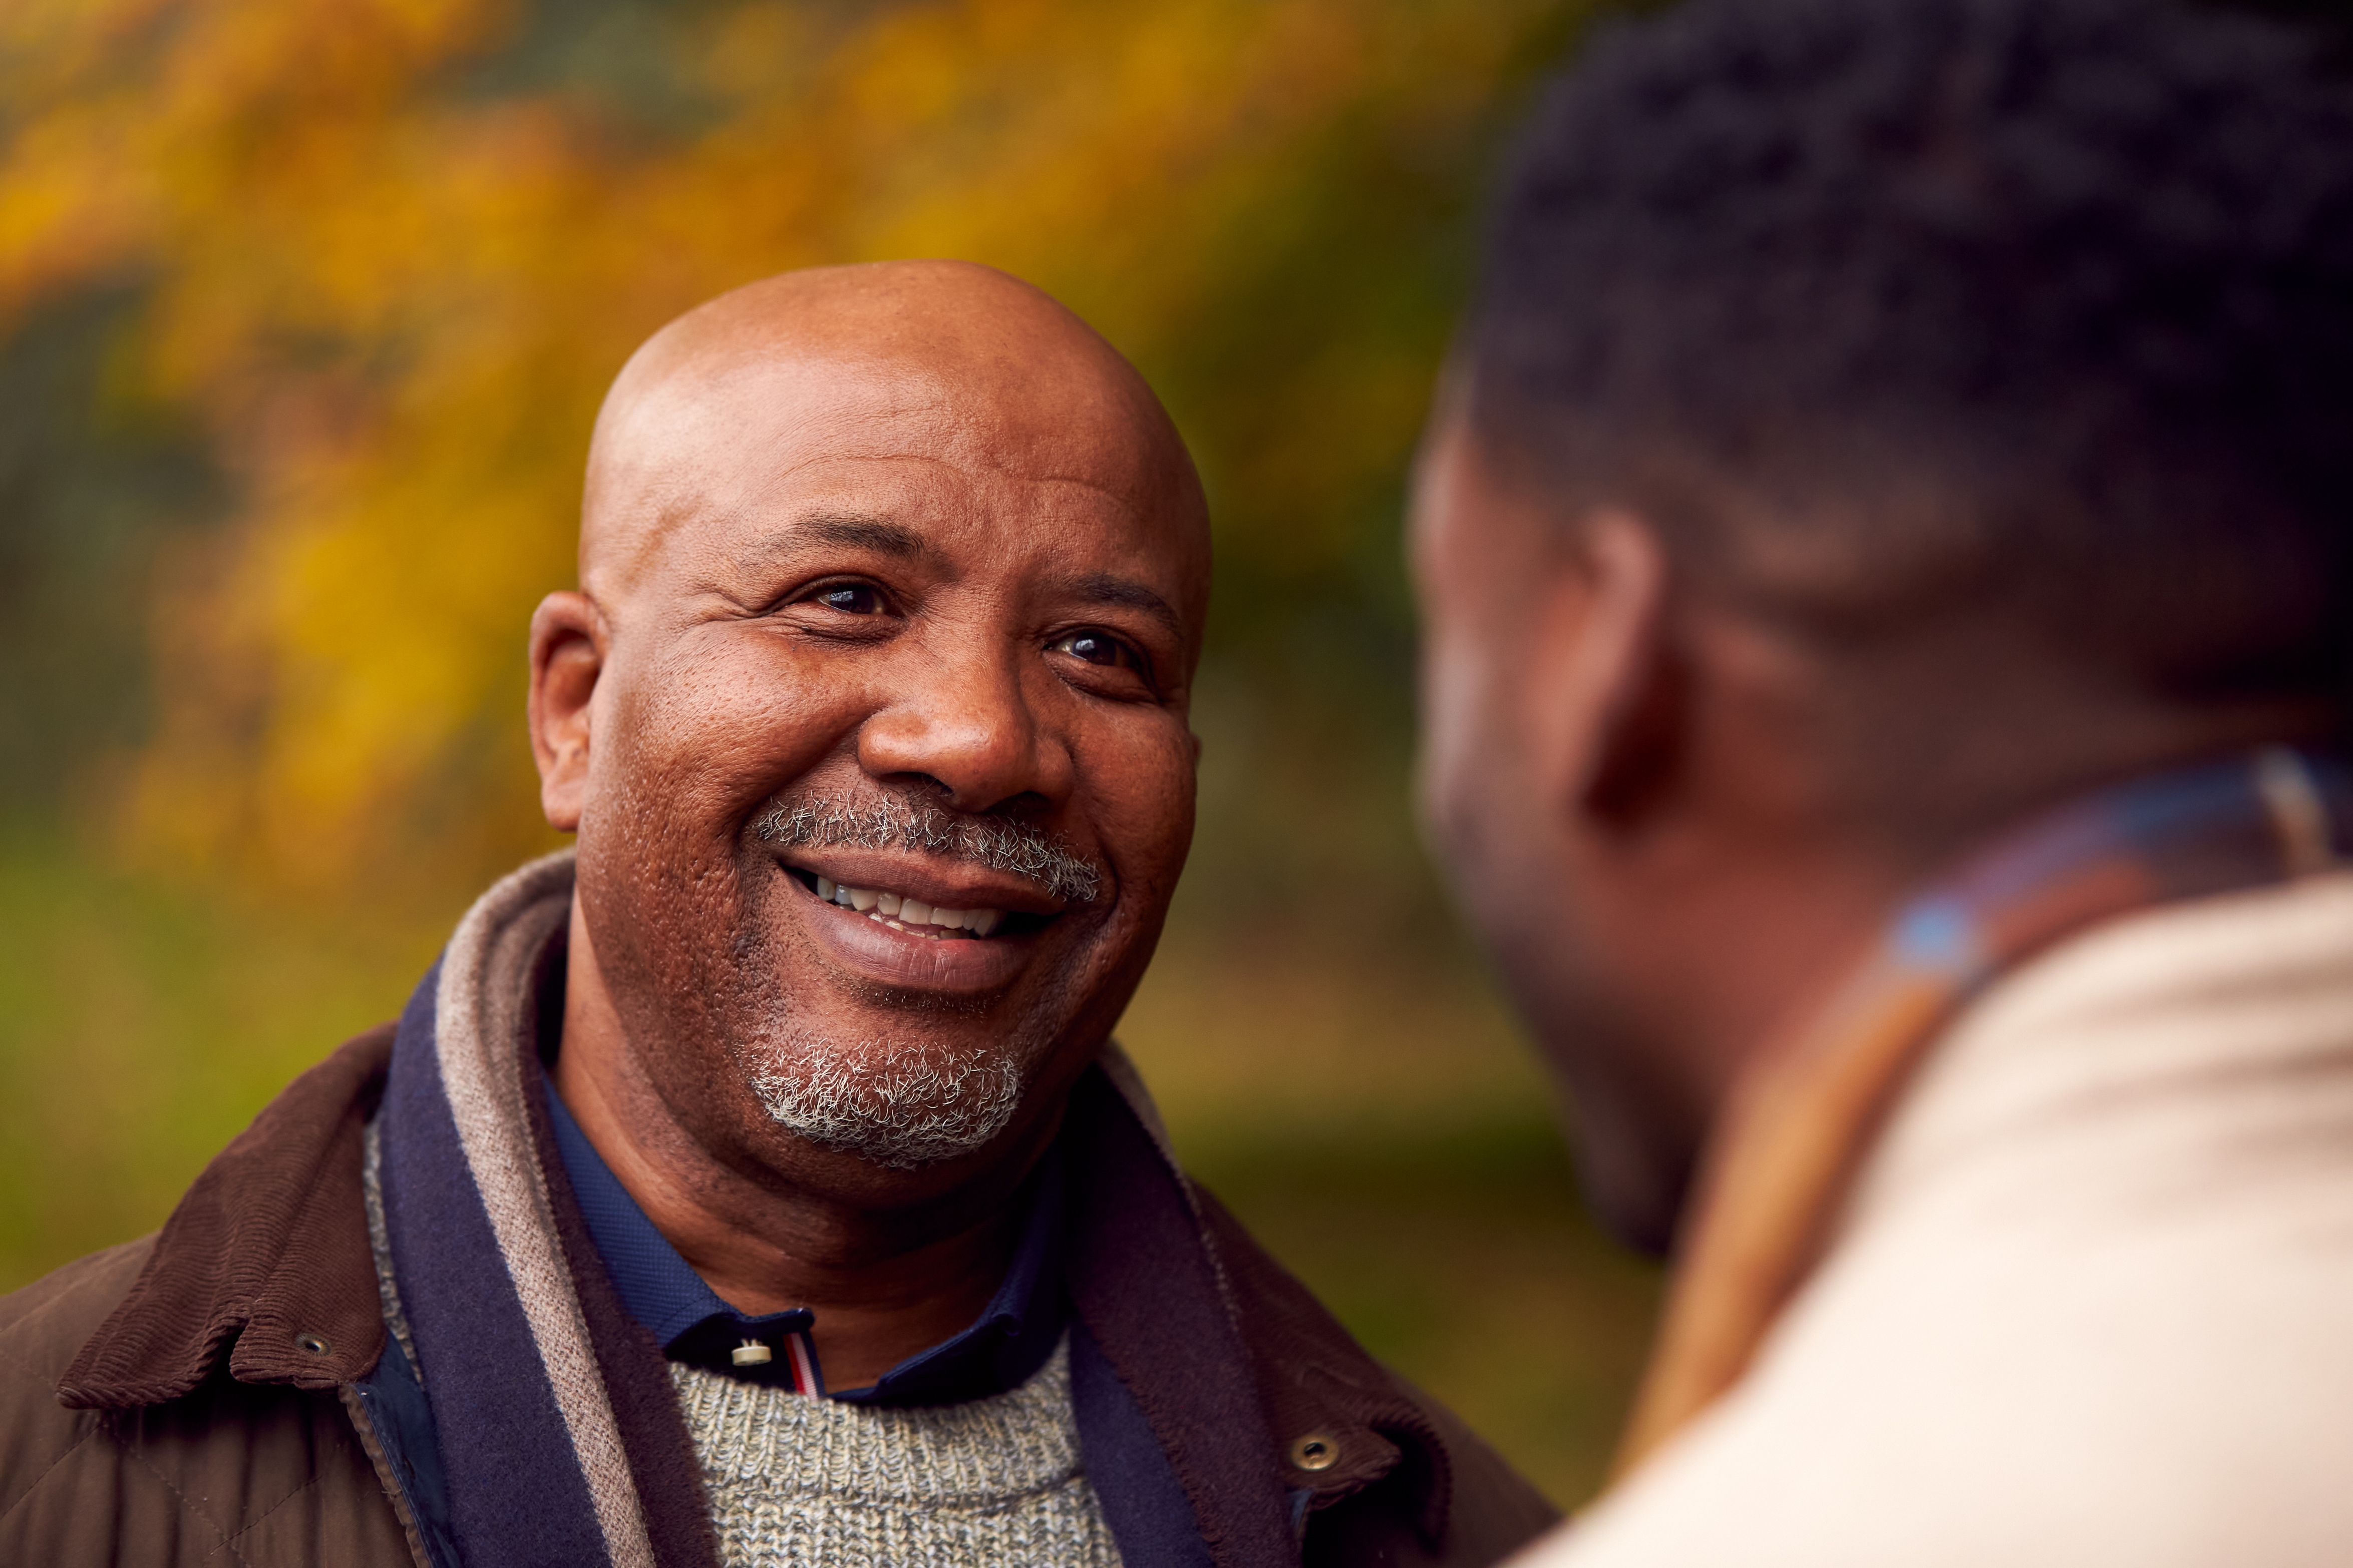 A Black father talking with his adult son, making direct eye contact, a caring smile engaging laugh lines. His son’s partial profile hints at a smile